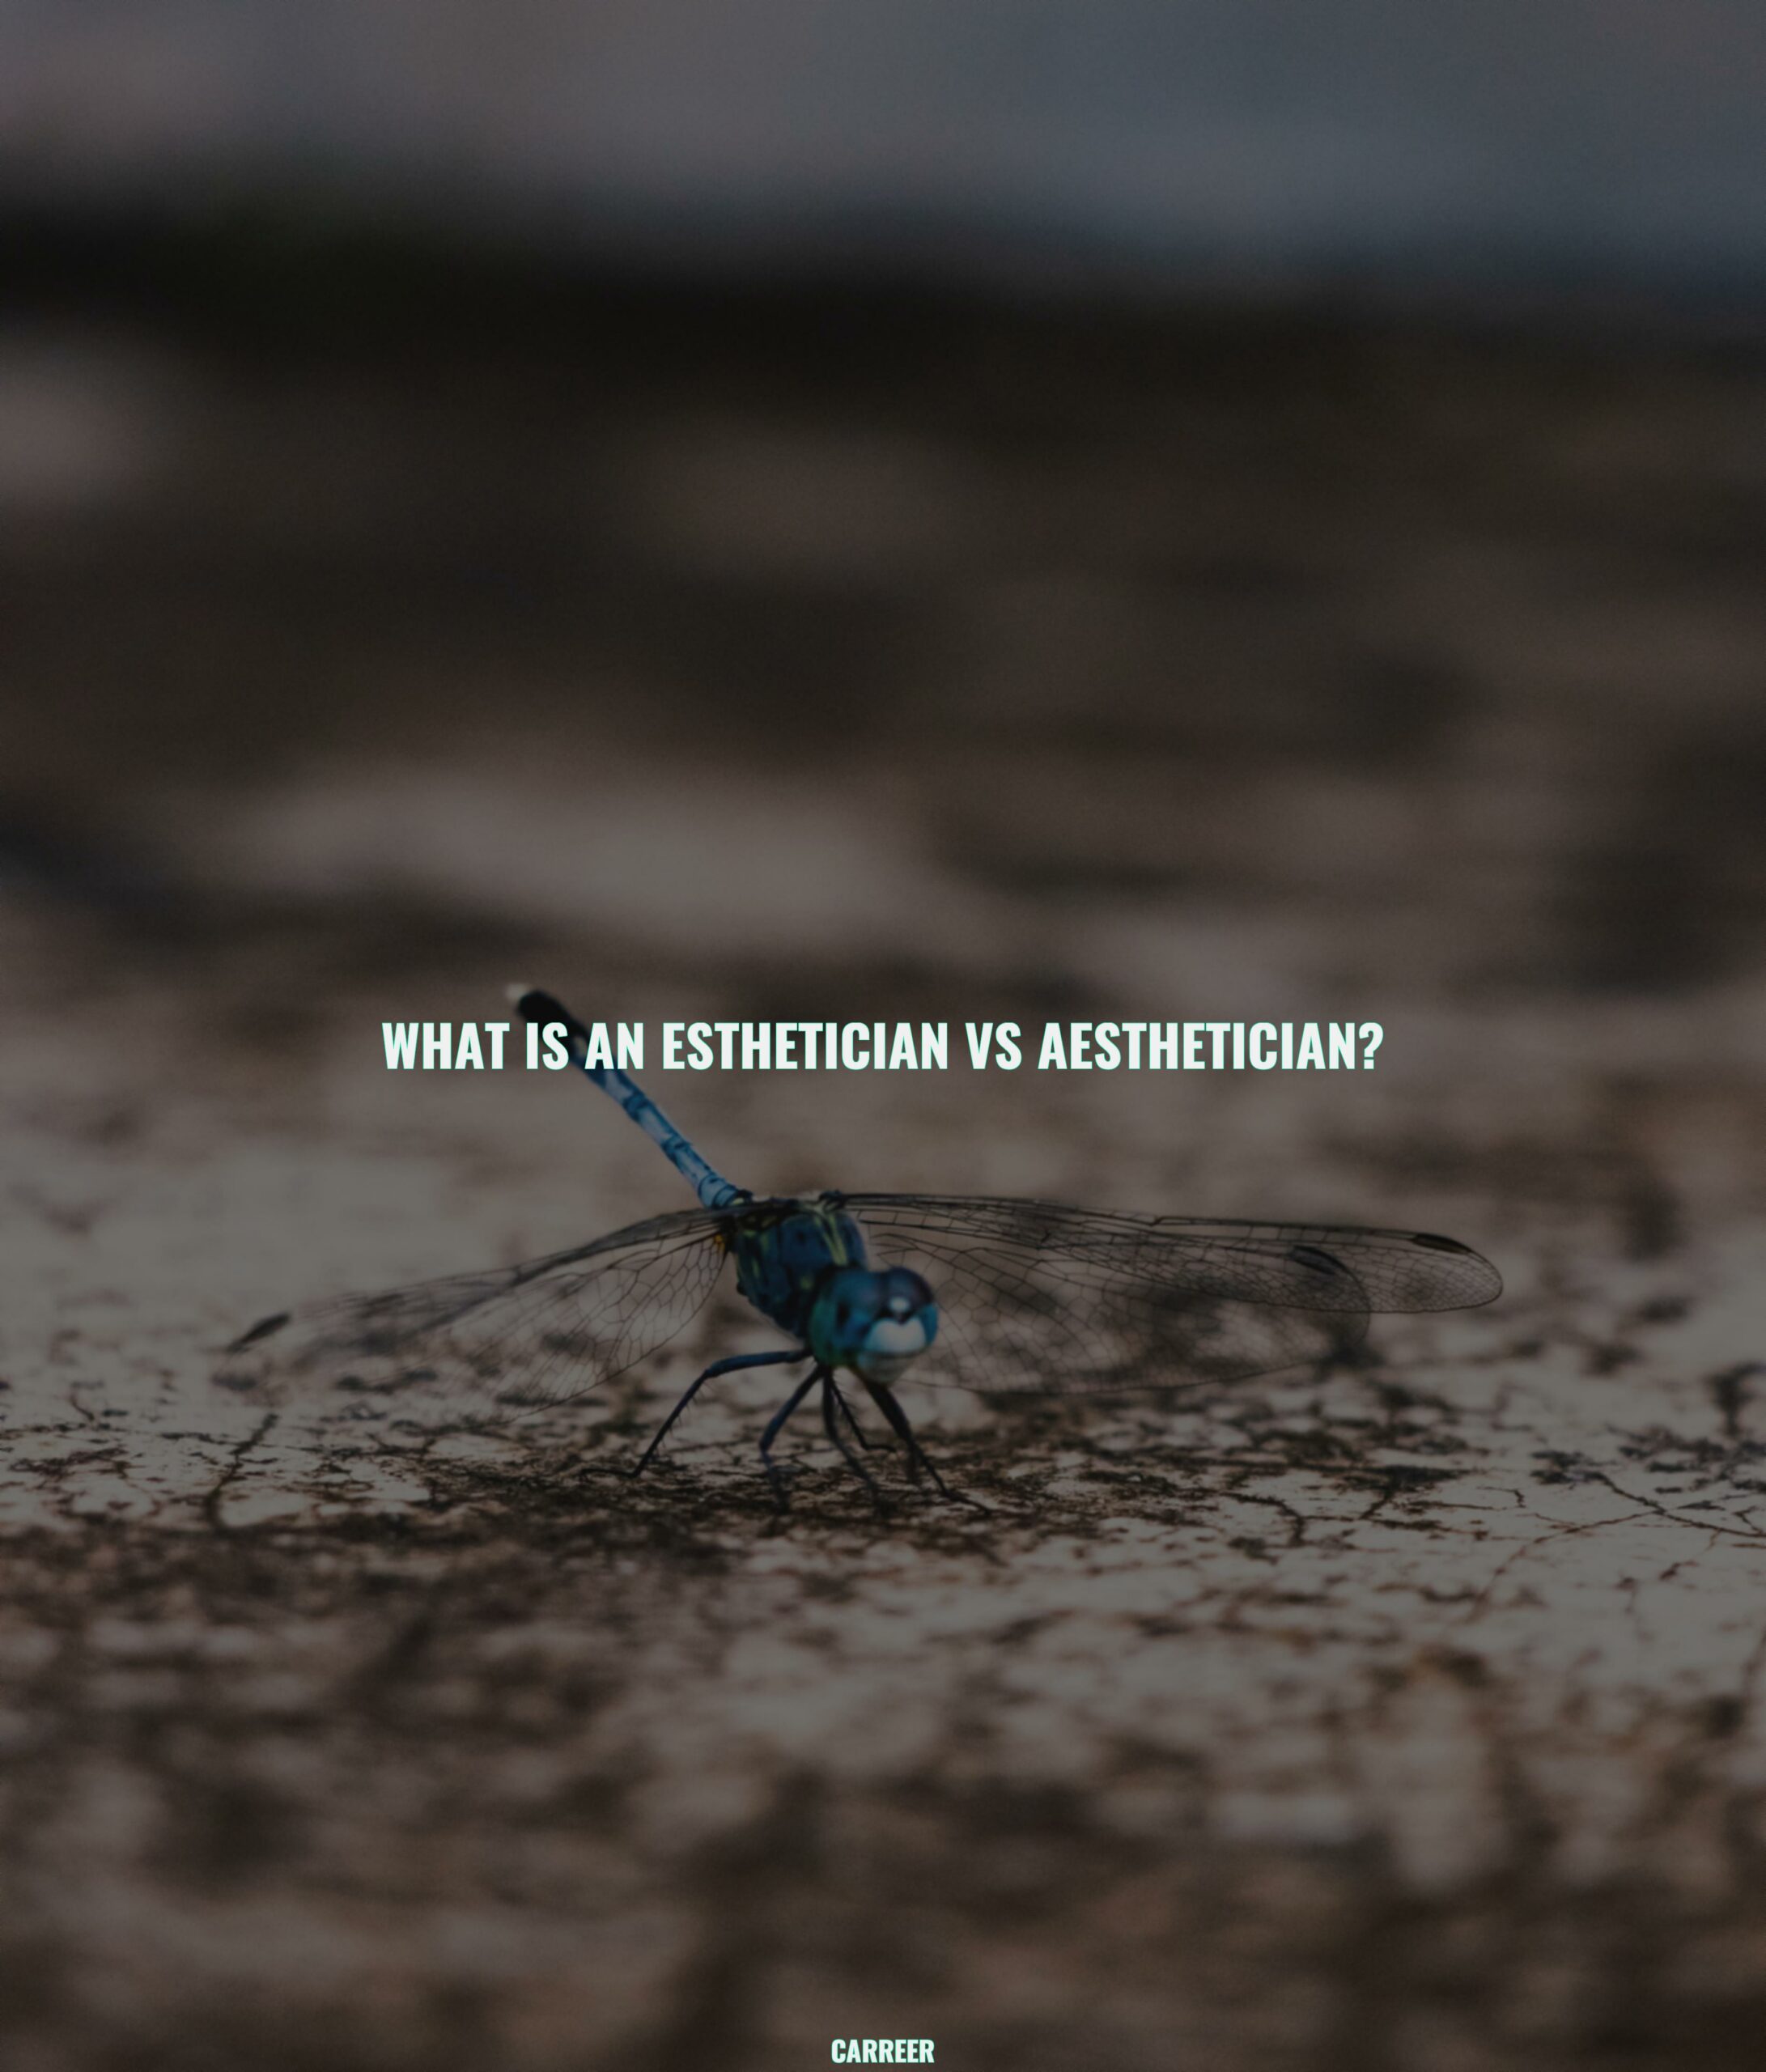 What is an esthetician vs aesthetician?